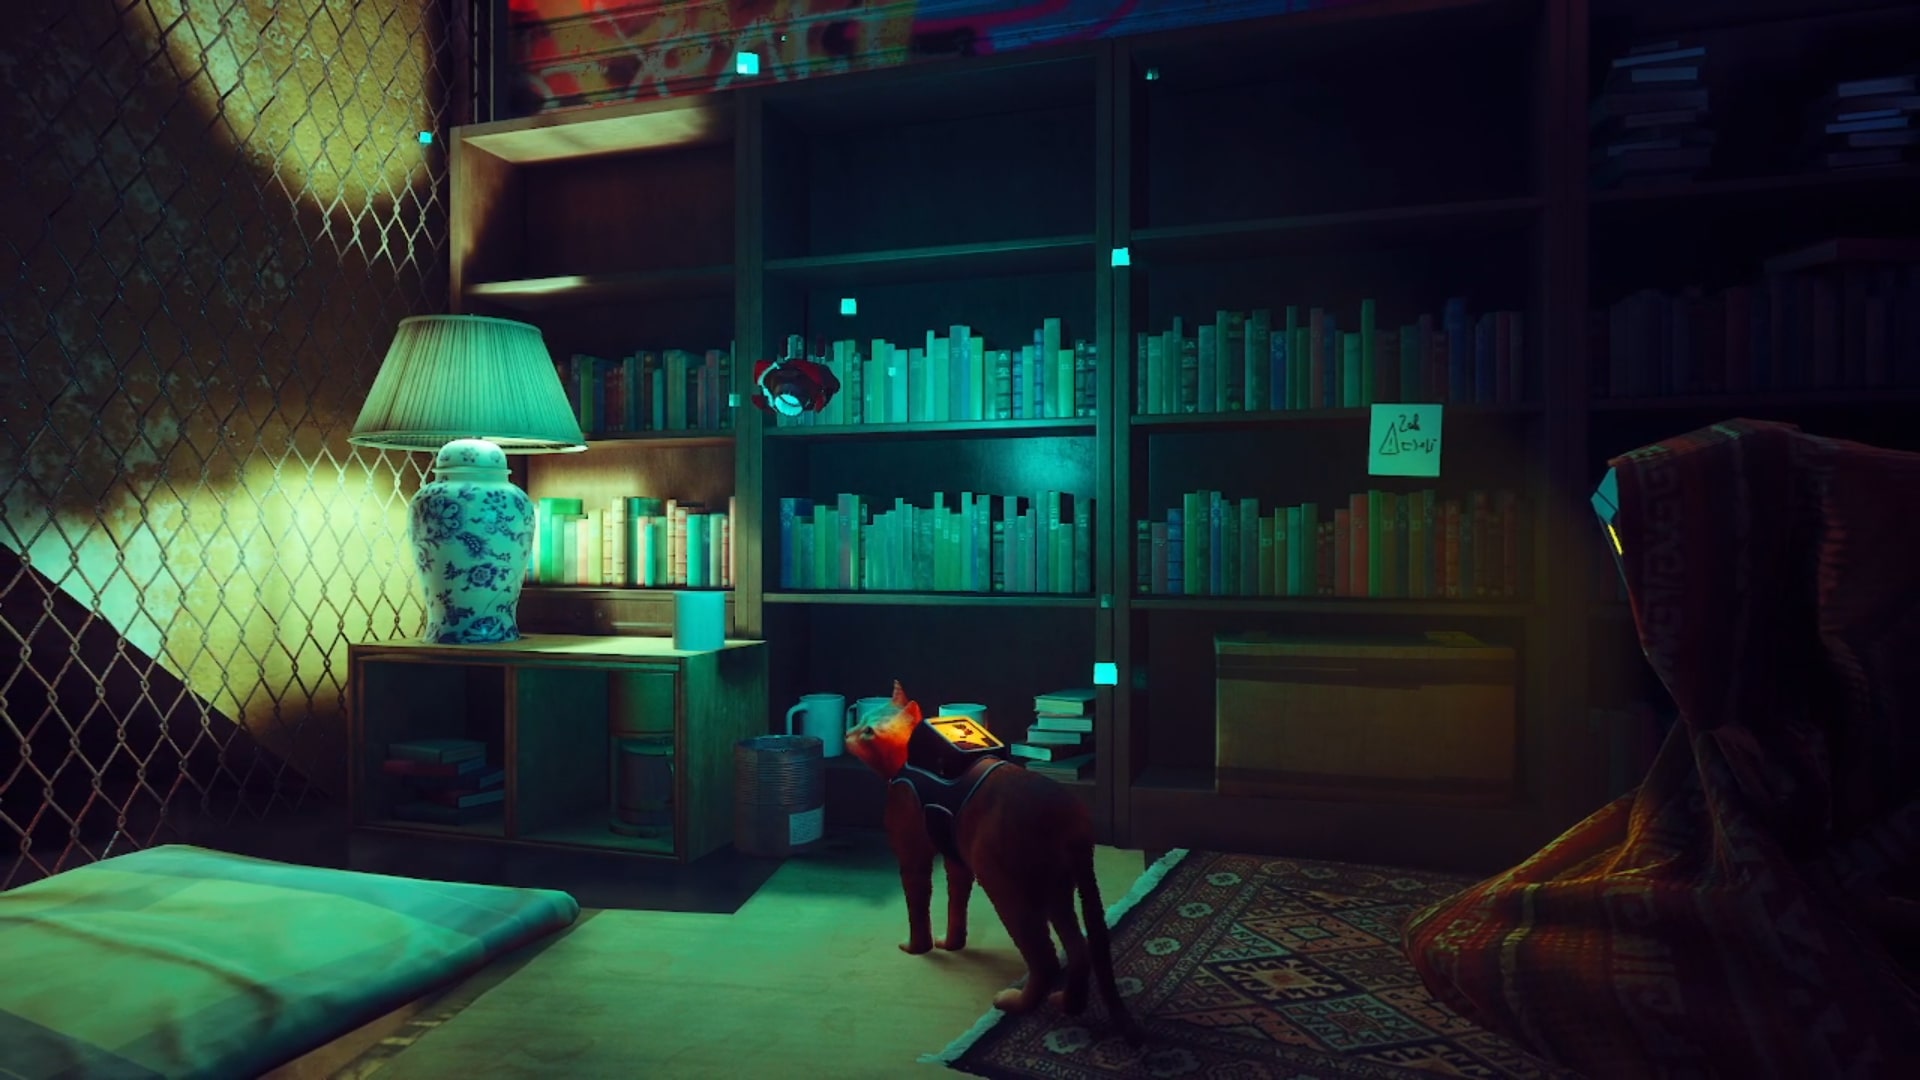 Stray memories guide: The orange tabby standing in front of four bookcases half-filled with books, while a robot swaddled in a blanket sits on a nearby rug